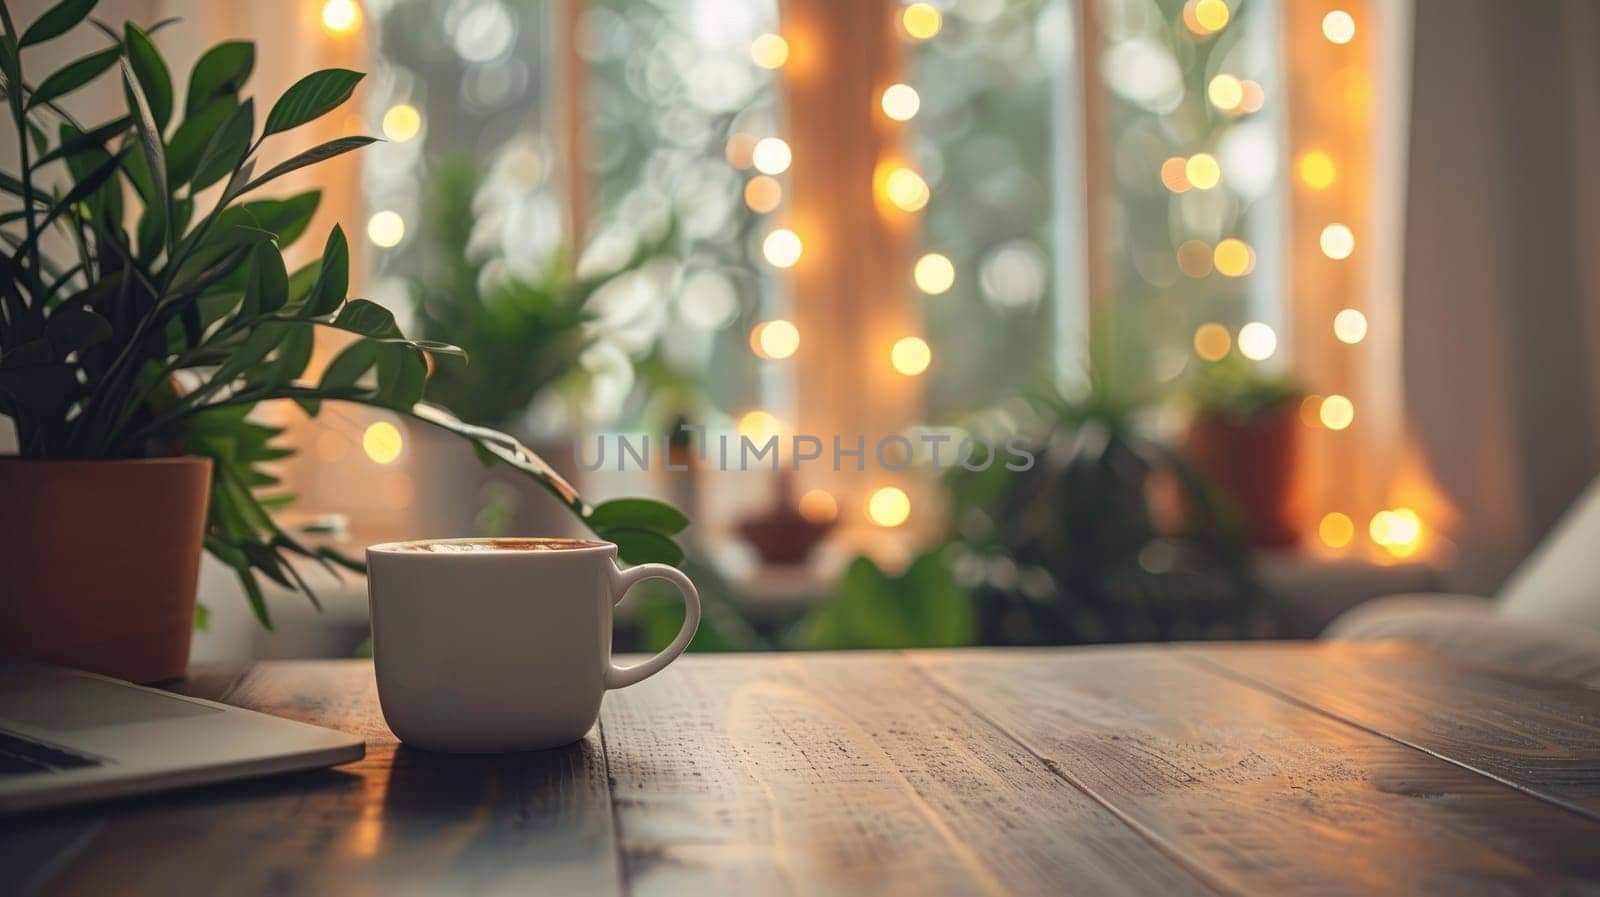 A minimalist home office with a simple desk and a cup of coffee with delicate bokeh lights in the background.